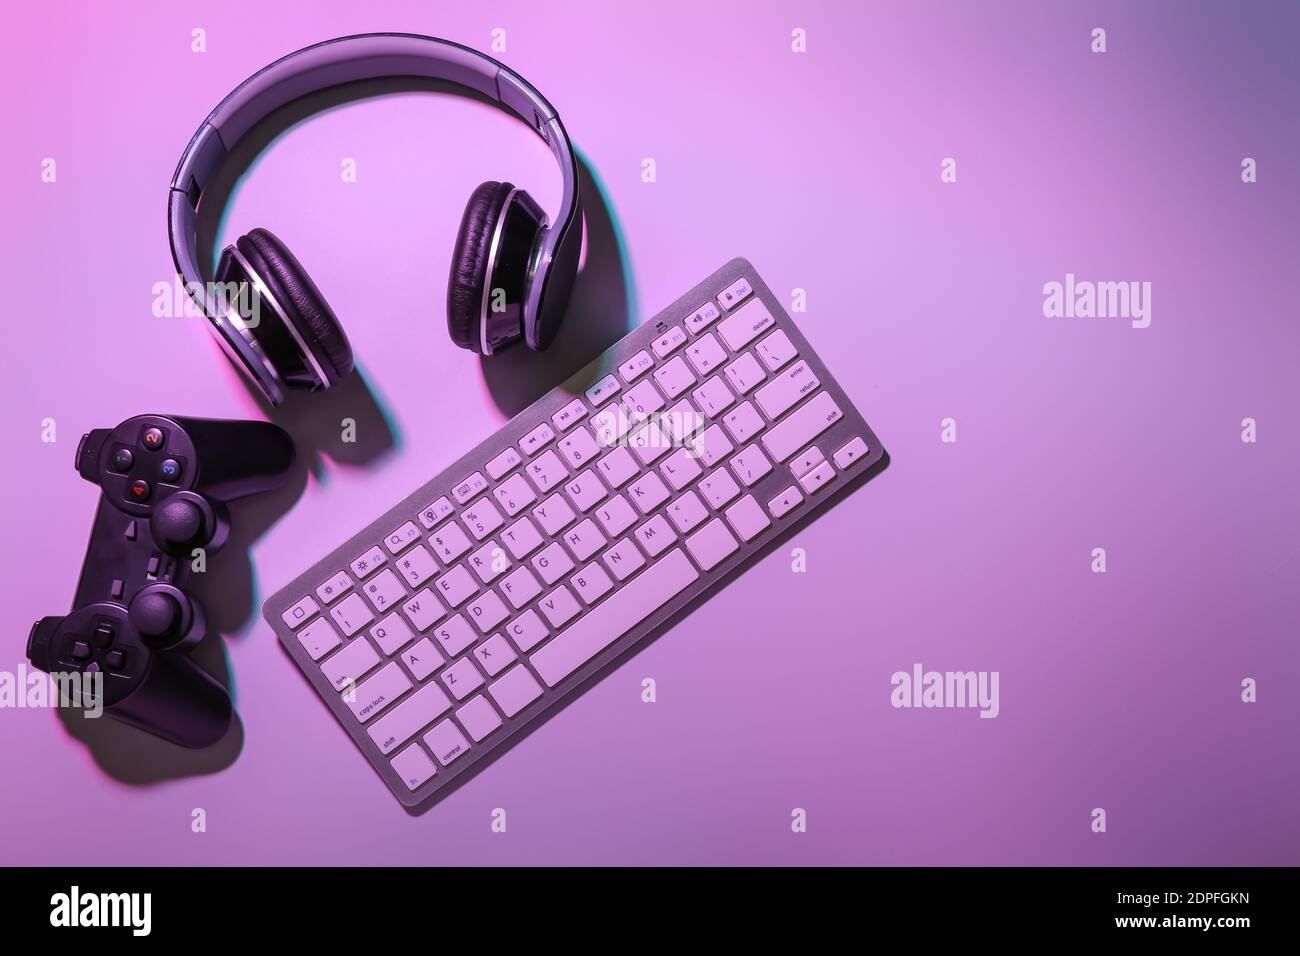 Computer keyboard, gamepad and headphones on color background Stock Photo